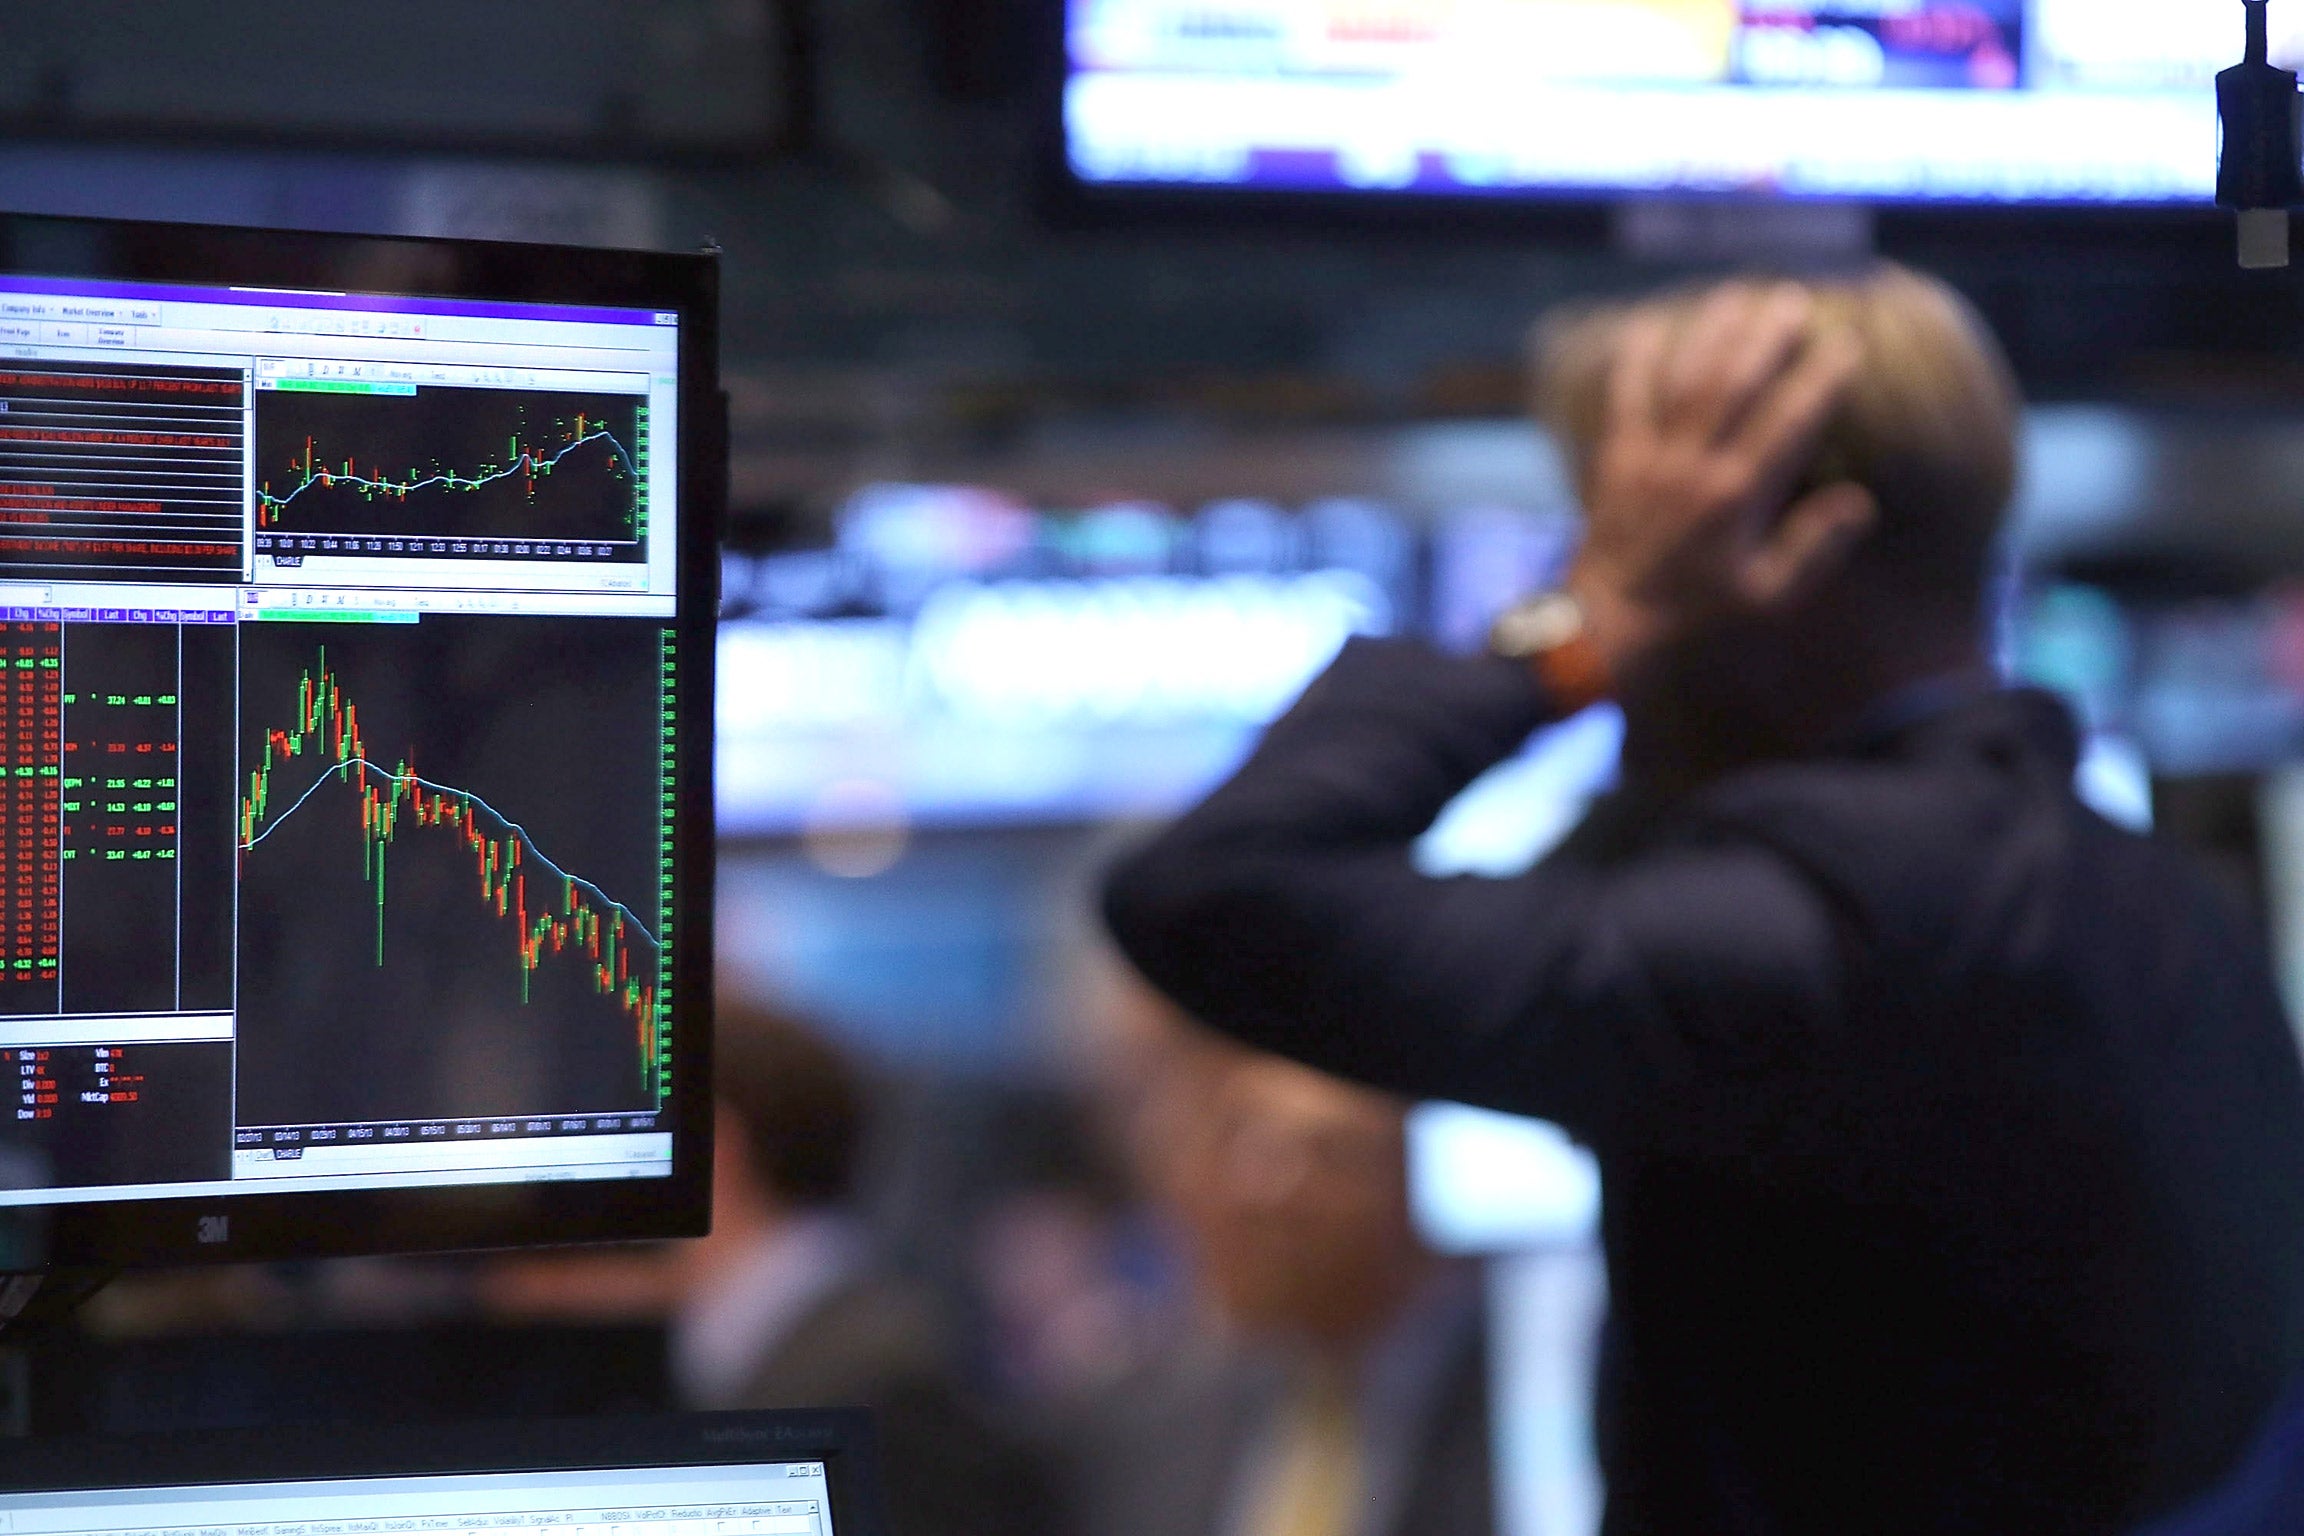 A trader at the New York Stock Exchange puts his hand to his head